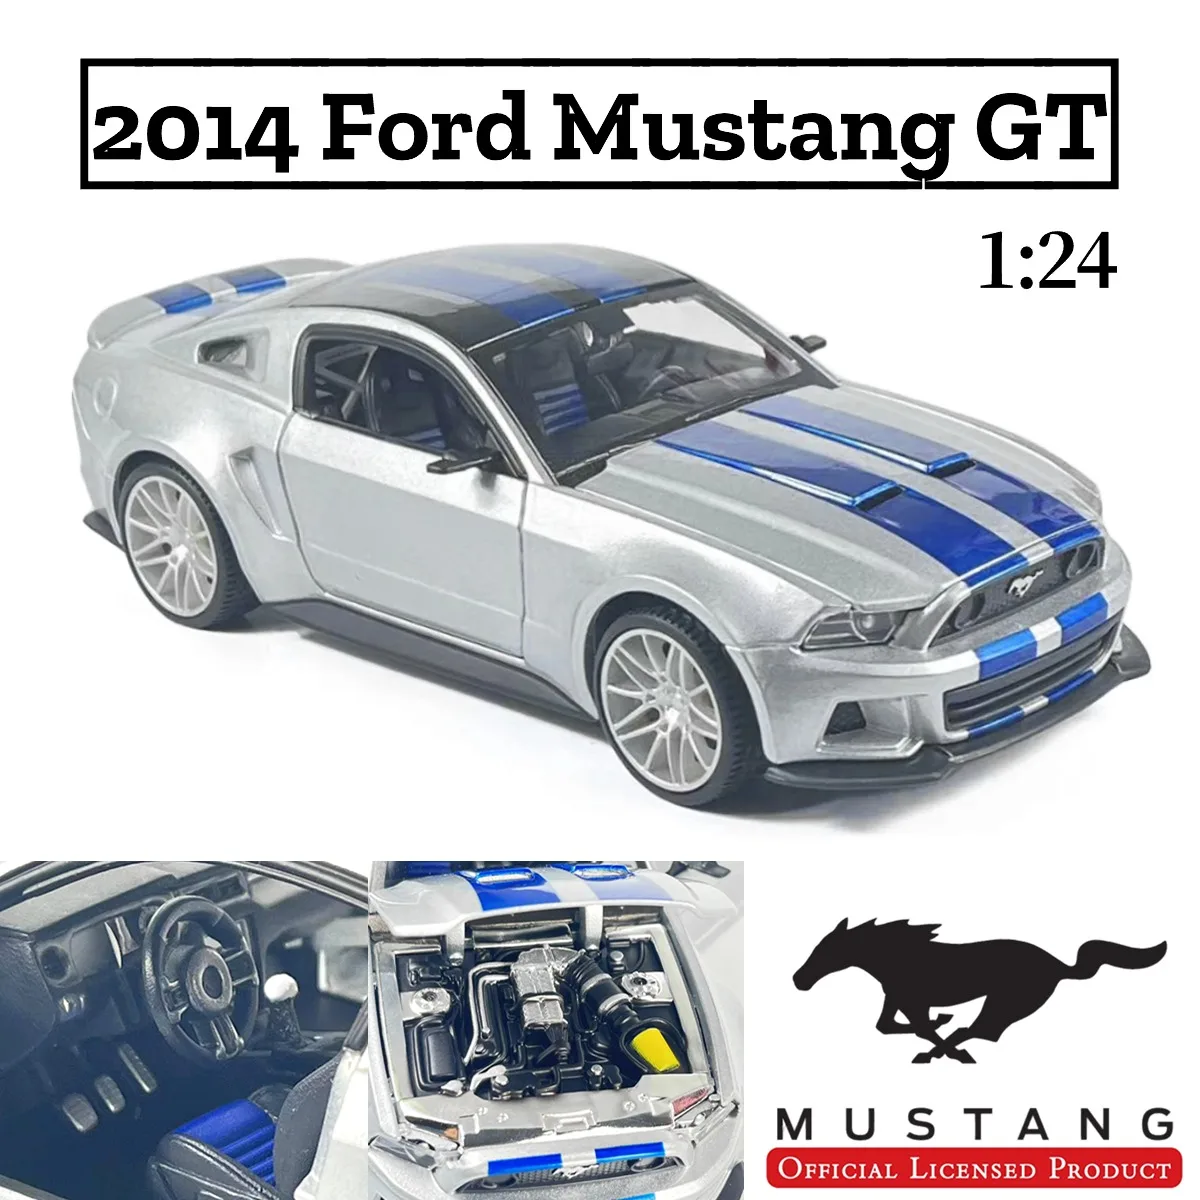 

1:24 Scale 2014 Ford Mustang Street Racer Replica Diecast Model Car Decoration Collection Gift for Boys and Toy Car Collectors